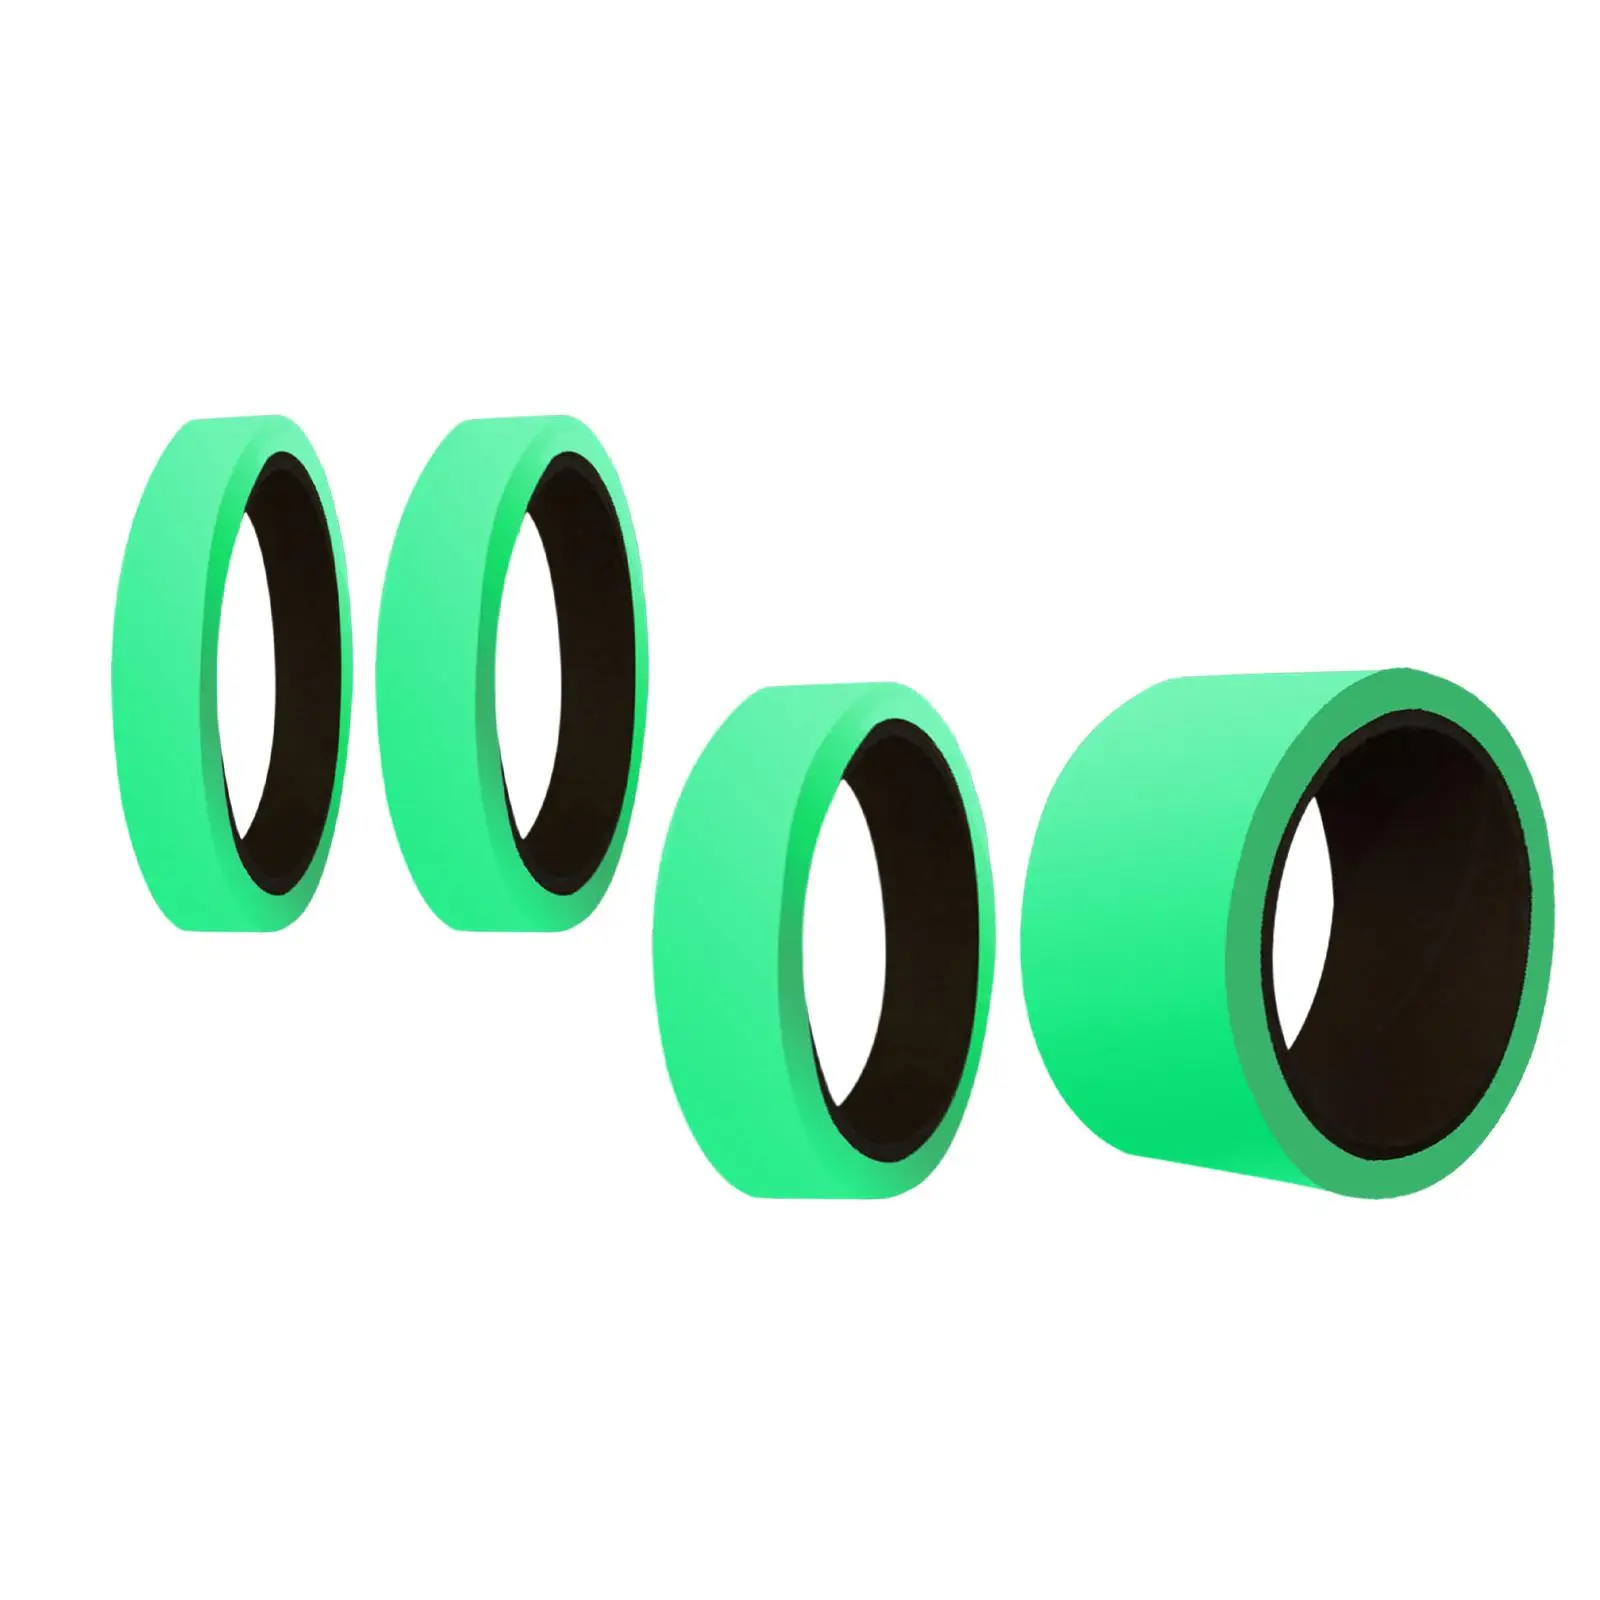 Glow in The Dark Tape Removable Photoluminescent Fluorescent Tape for Emergency Exit Night Decorations Theater Stage Steps Walls